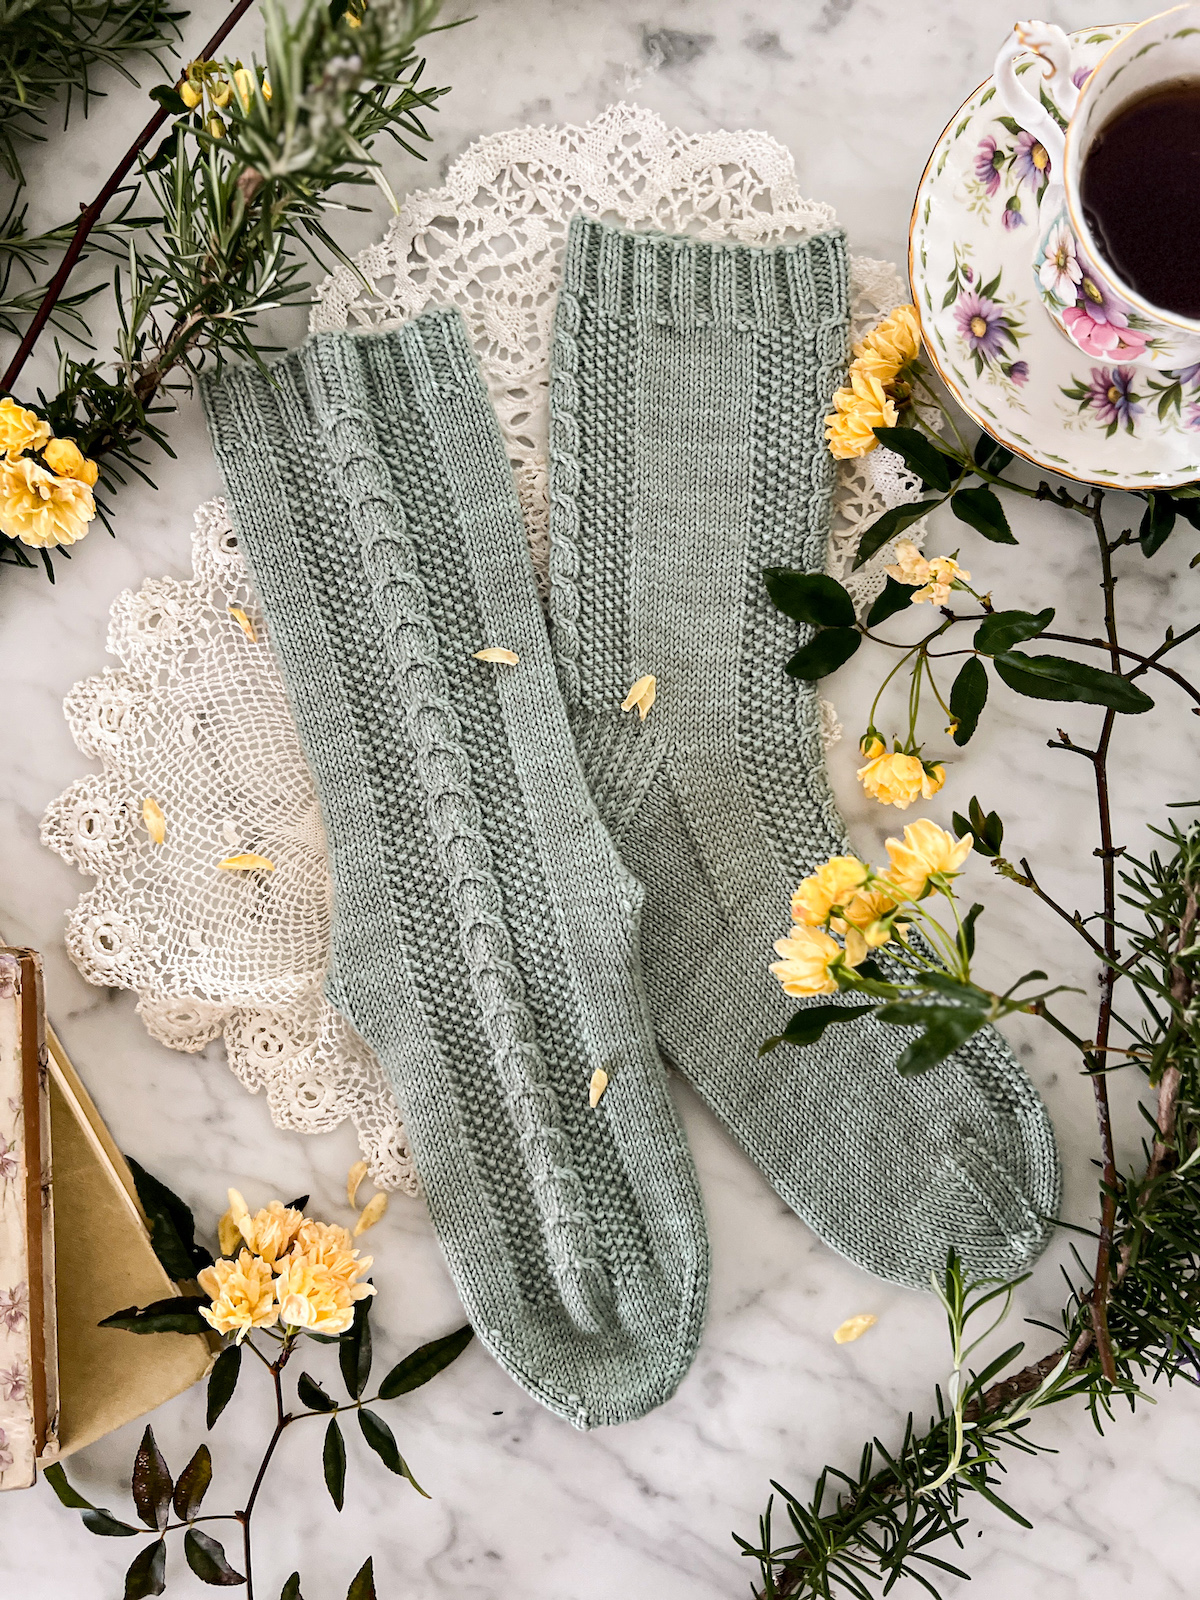 A flatlay photograph of the Madeleine Socks with one sock on its side and one sock with the front panel displayed so the dainty cables are more visible. They're surrounded by antique books, a teacup full of black tea, and some miniature yellow roses.